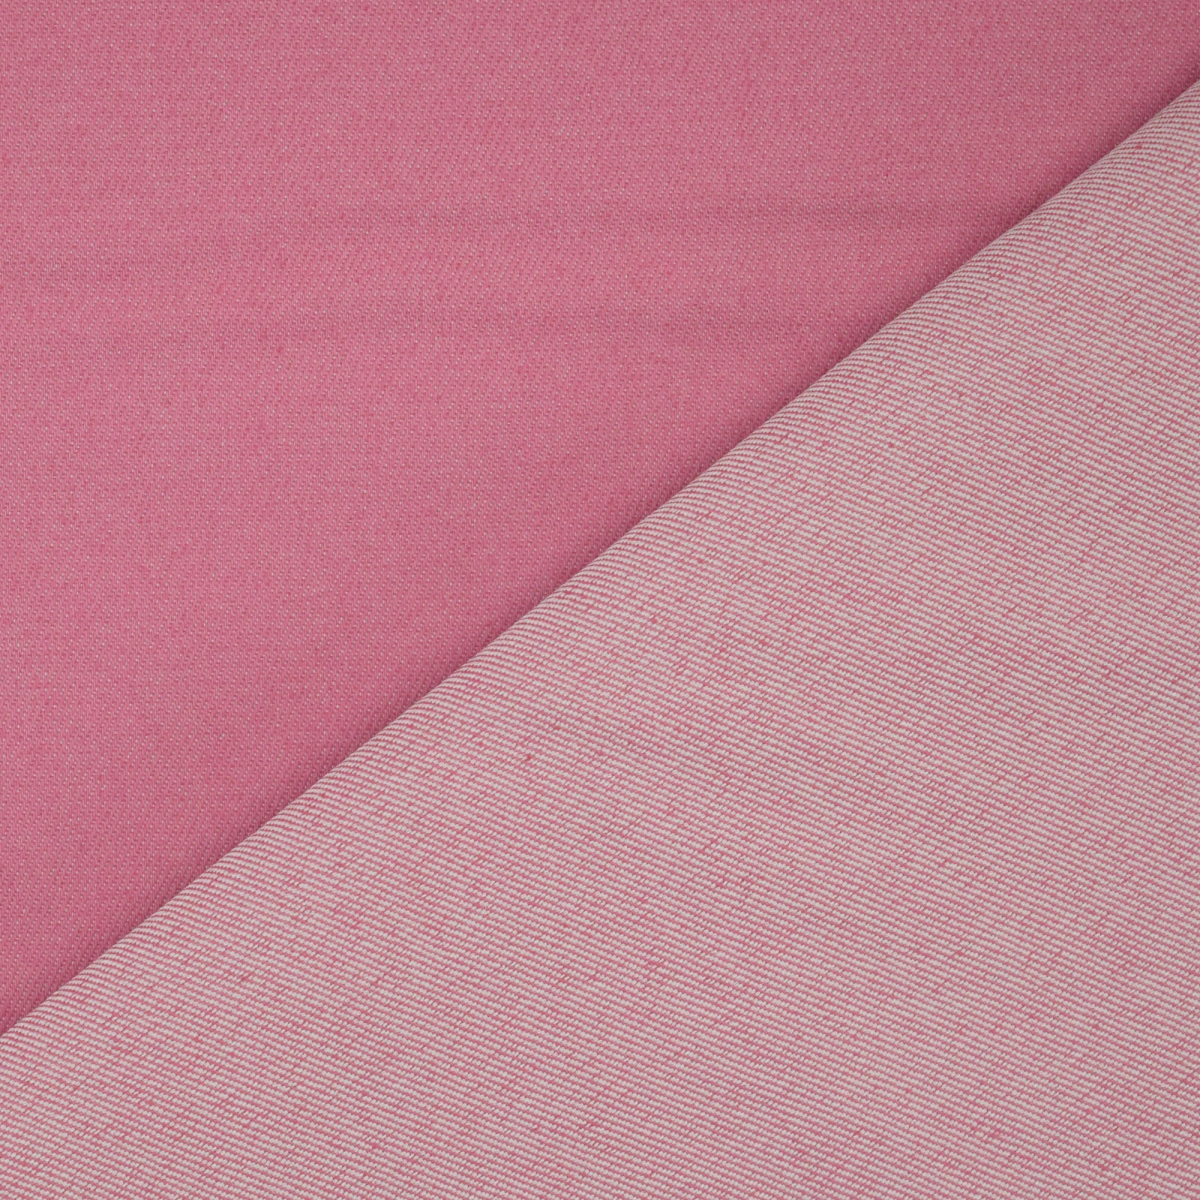 Pink Denim Fabric by the Yard Jeans Cotton Fabric Jeans 